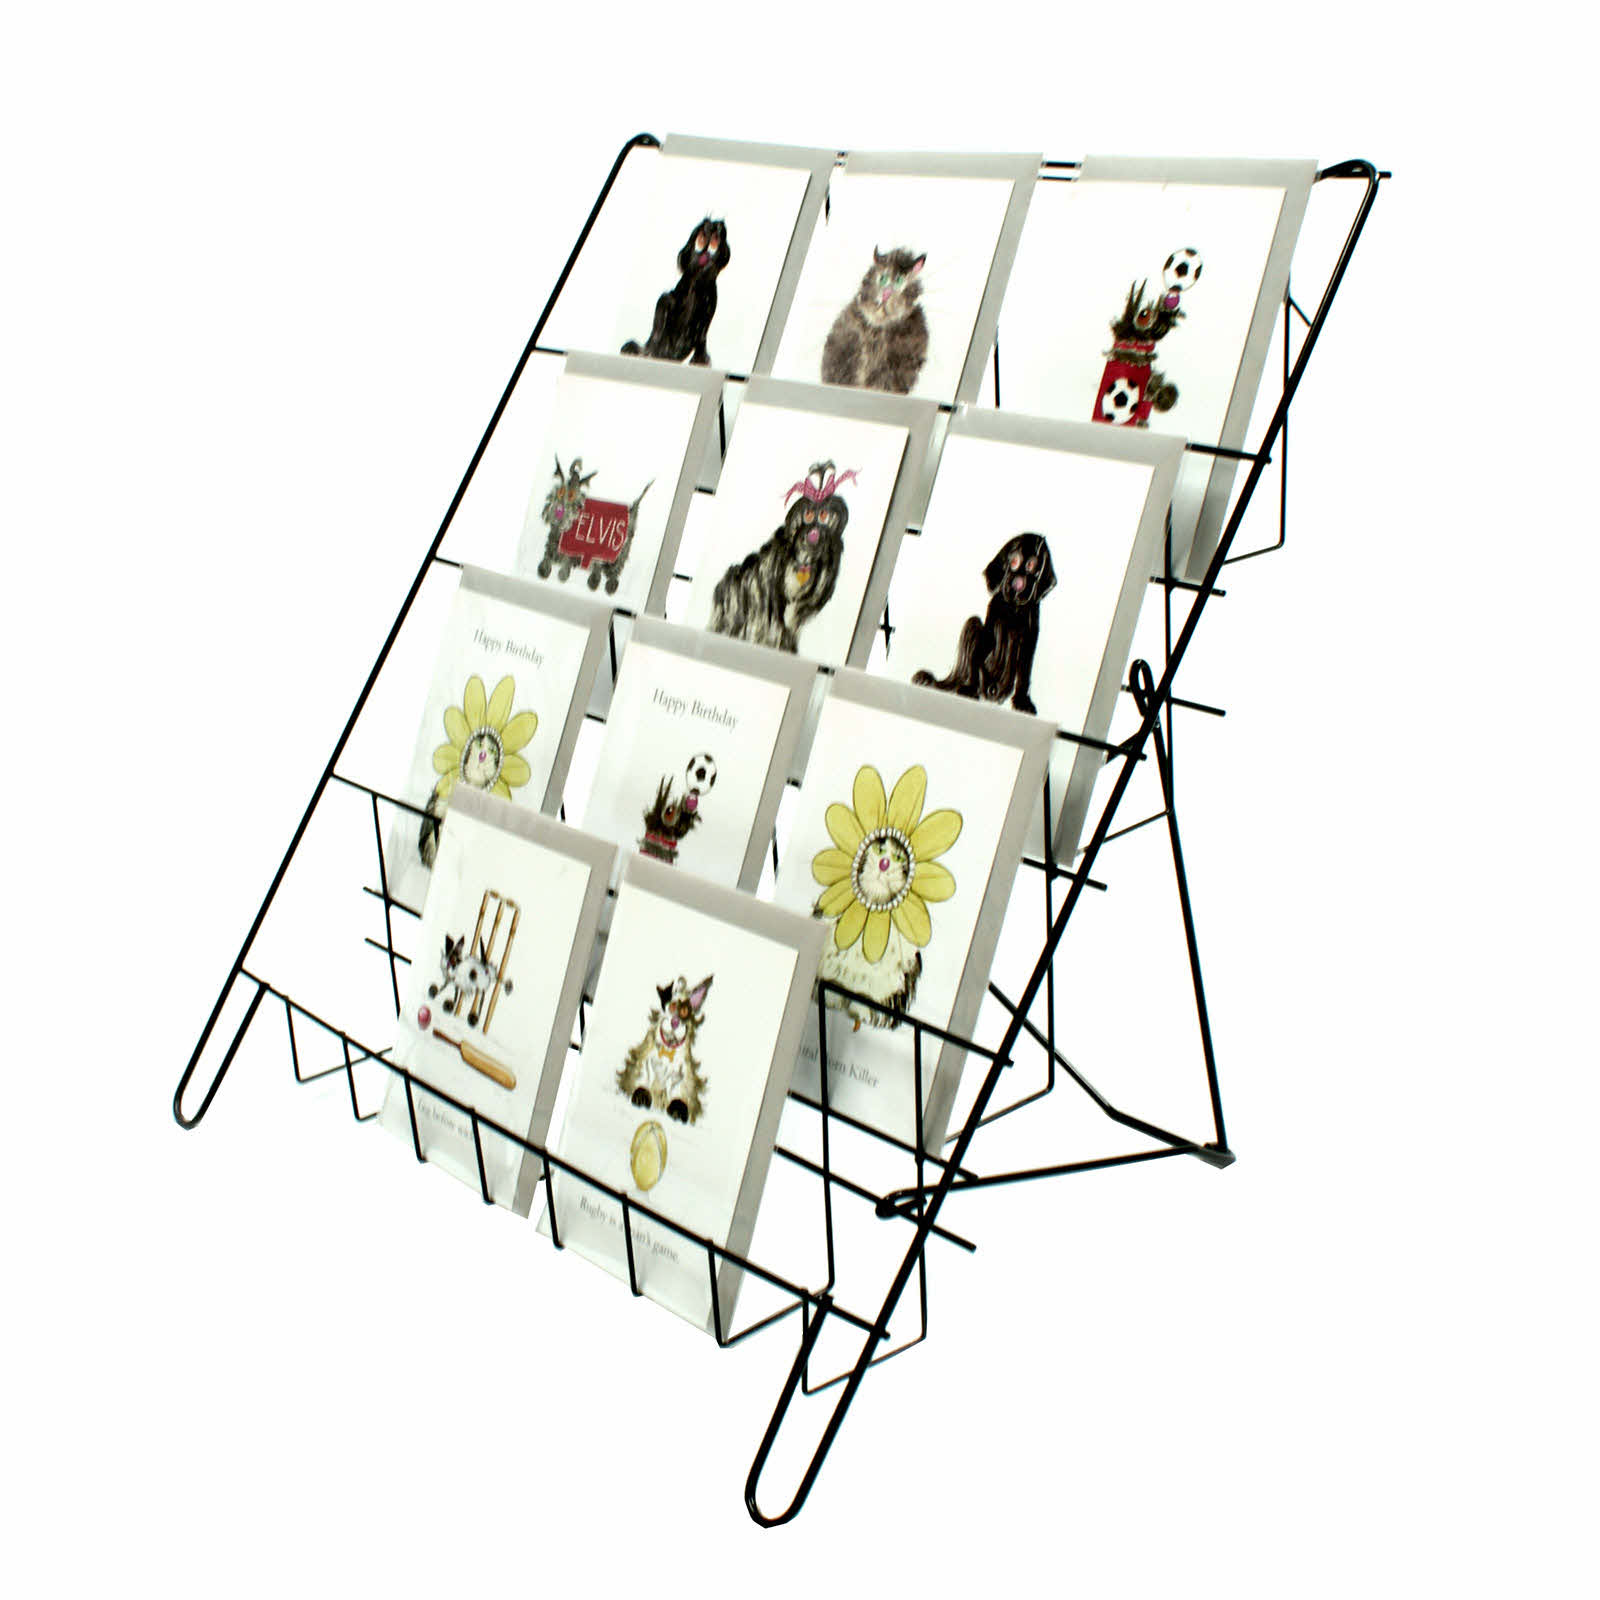 Card Stand - Counter Standing Collapsible Card or Book Display in Black or White (E8+) 